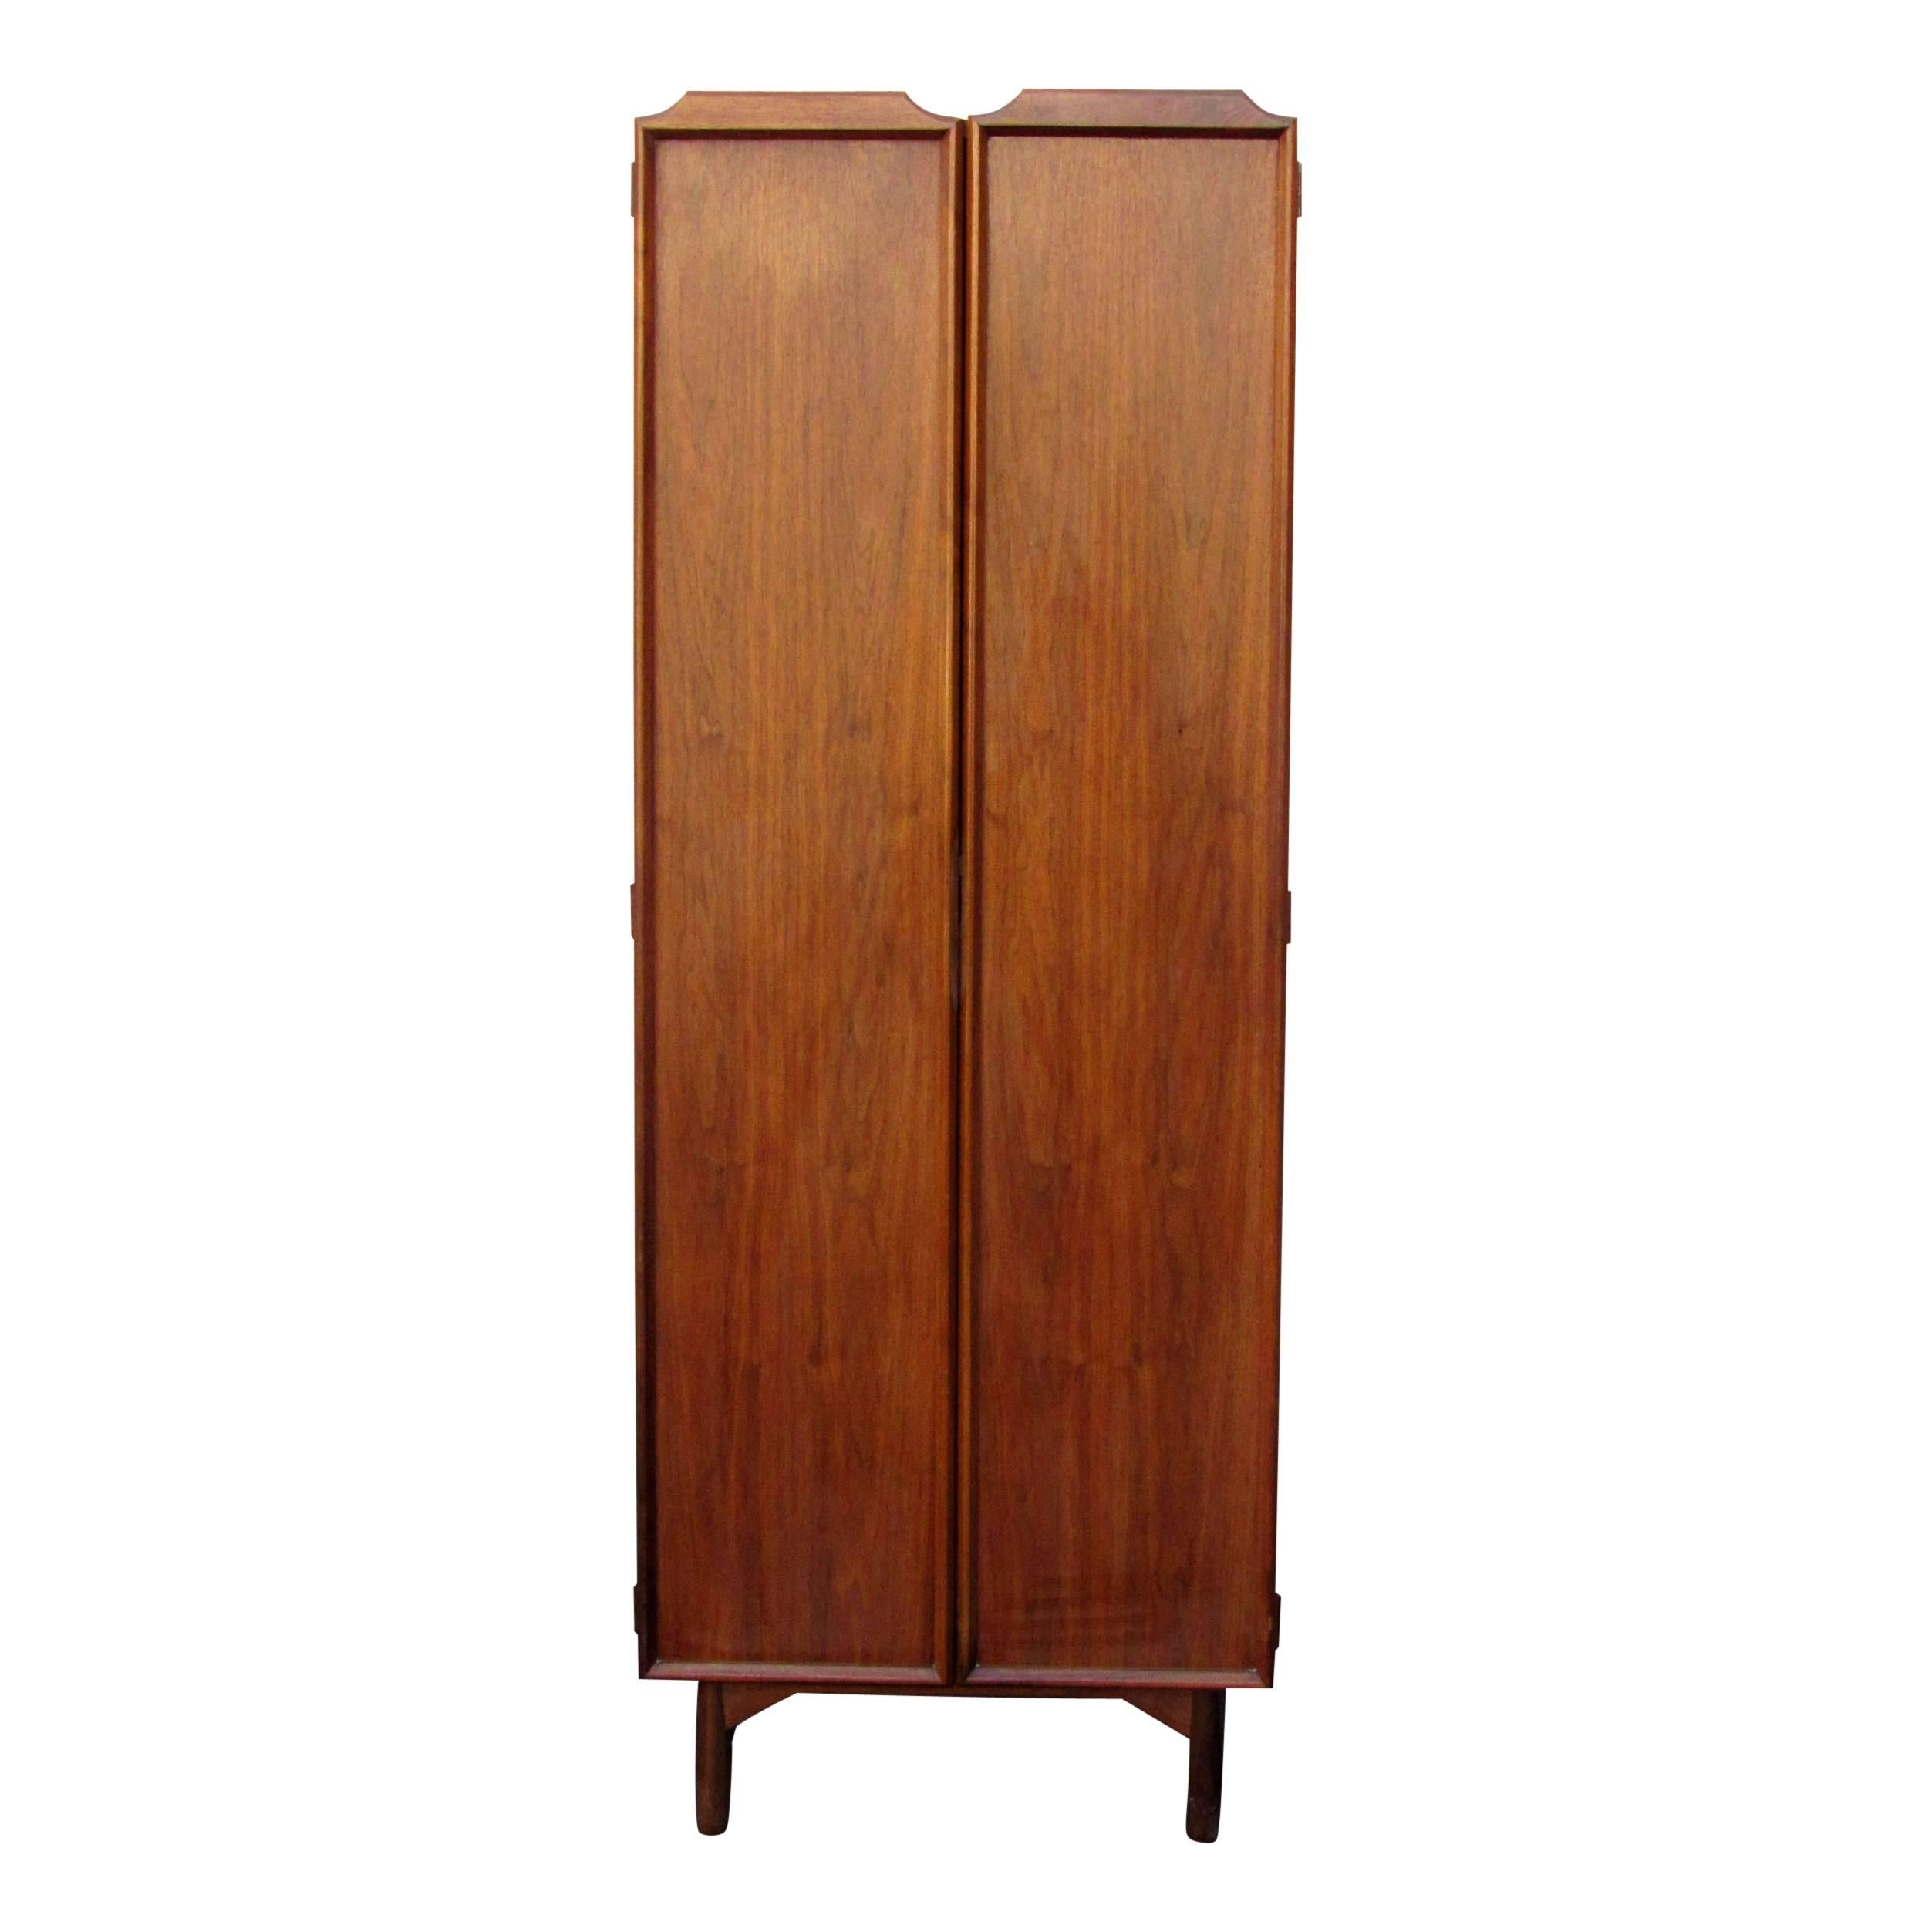 John Keal Dressing cabinet for Brown Saltman of California,  1960s.   Chest has six drawers,  tie/accessories swing out arms, carved out impressions for accessories or change,  a vanity mirror and an interior light.  